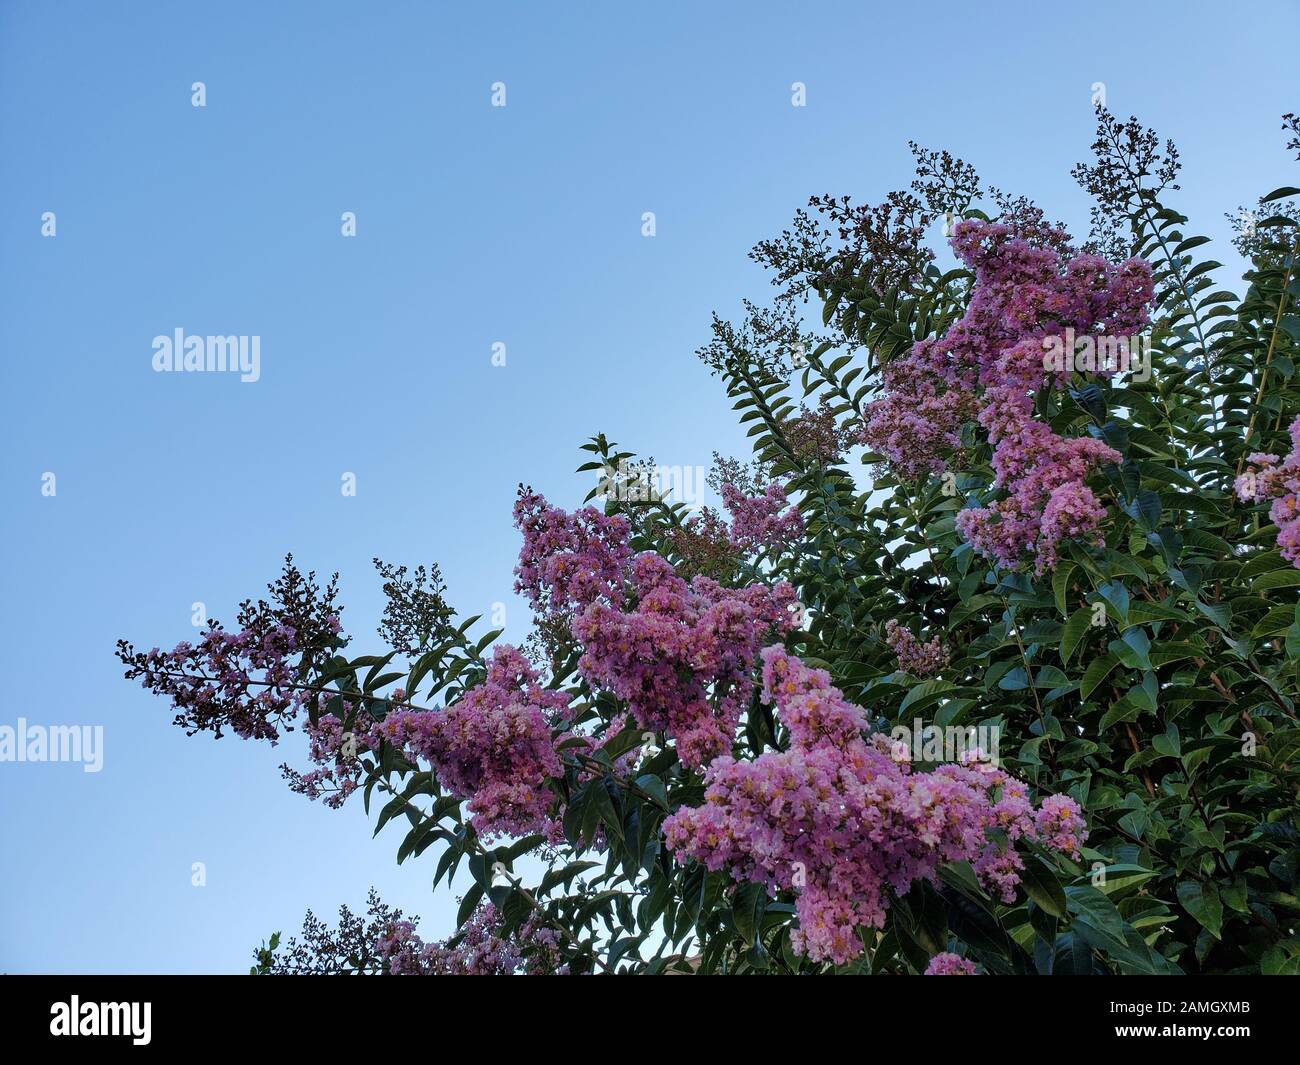 Close-up of a flowering crape myrtle (Lagerstroemia) tree in San Ramon, California, August 14, 2019. () Stock Photo